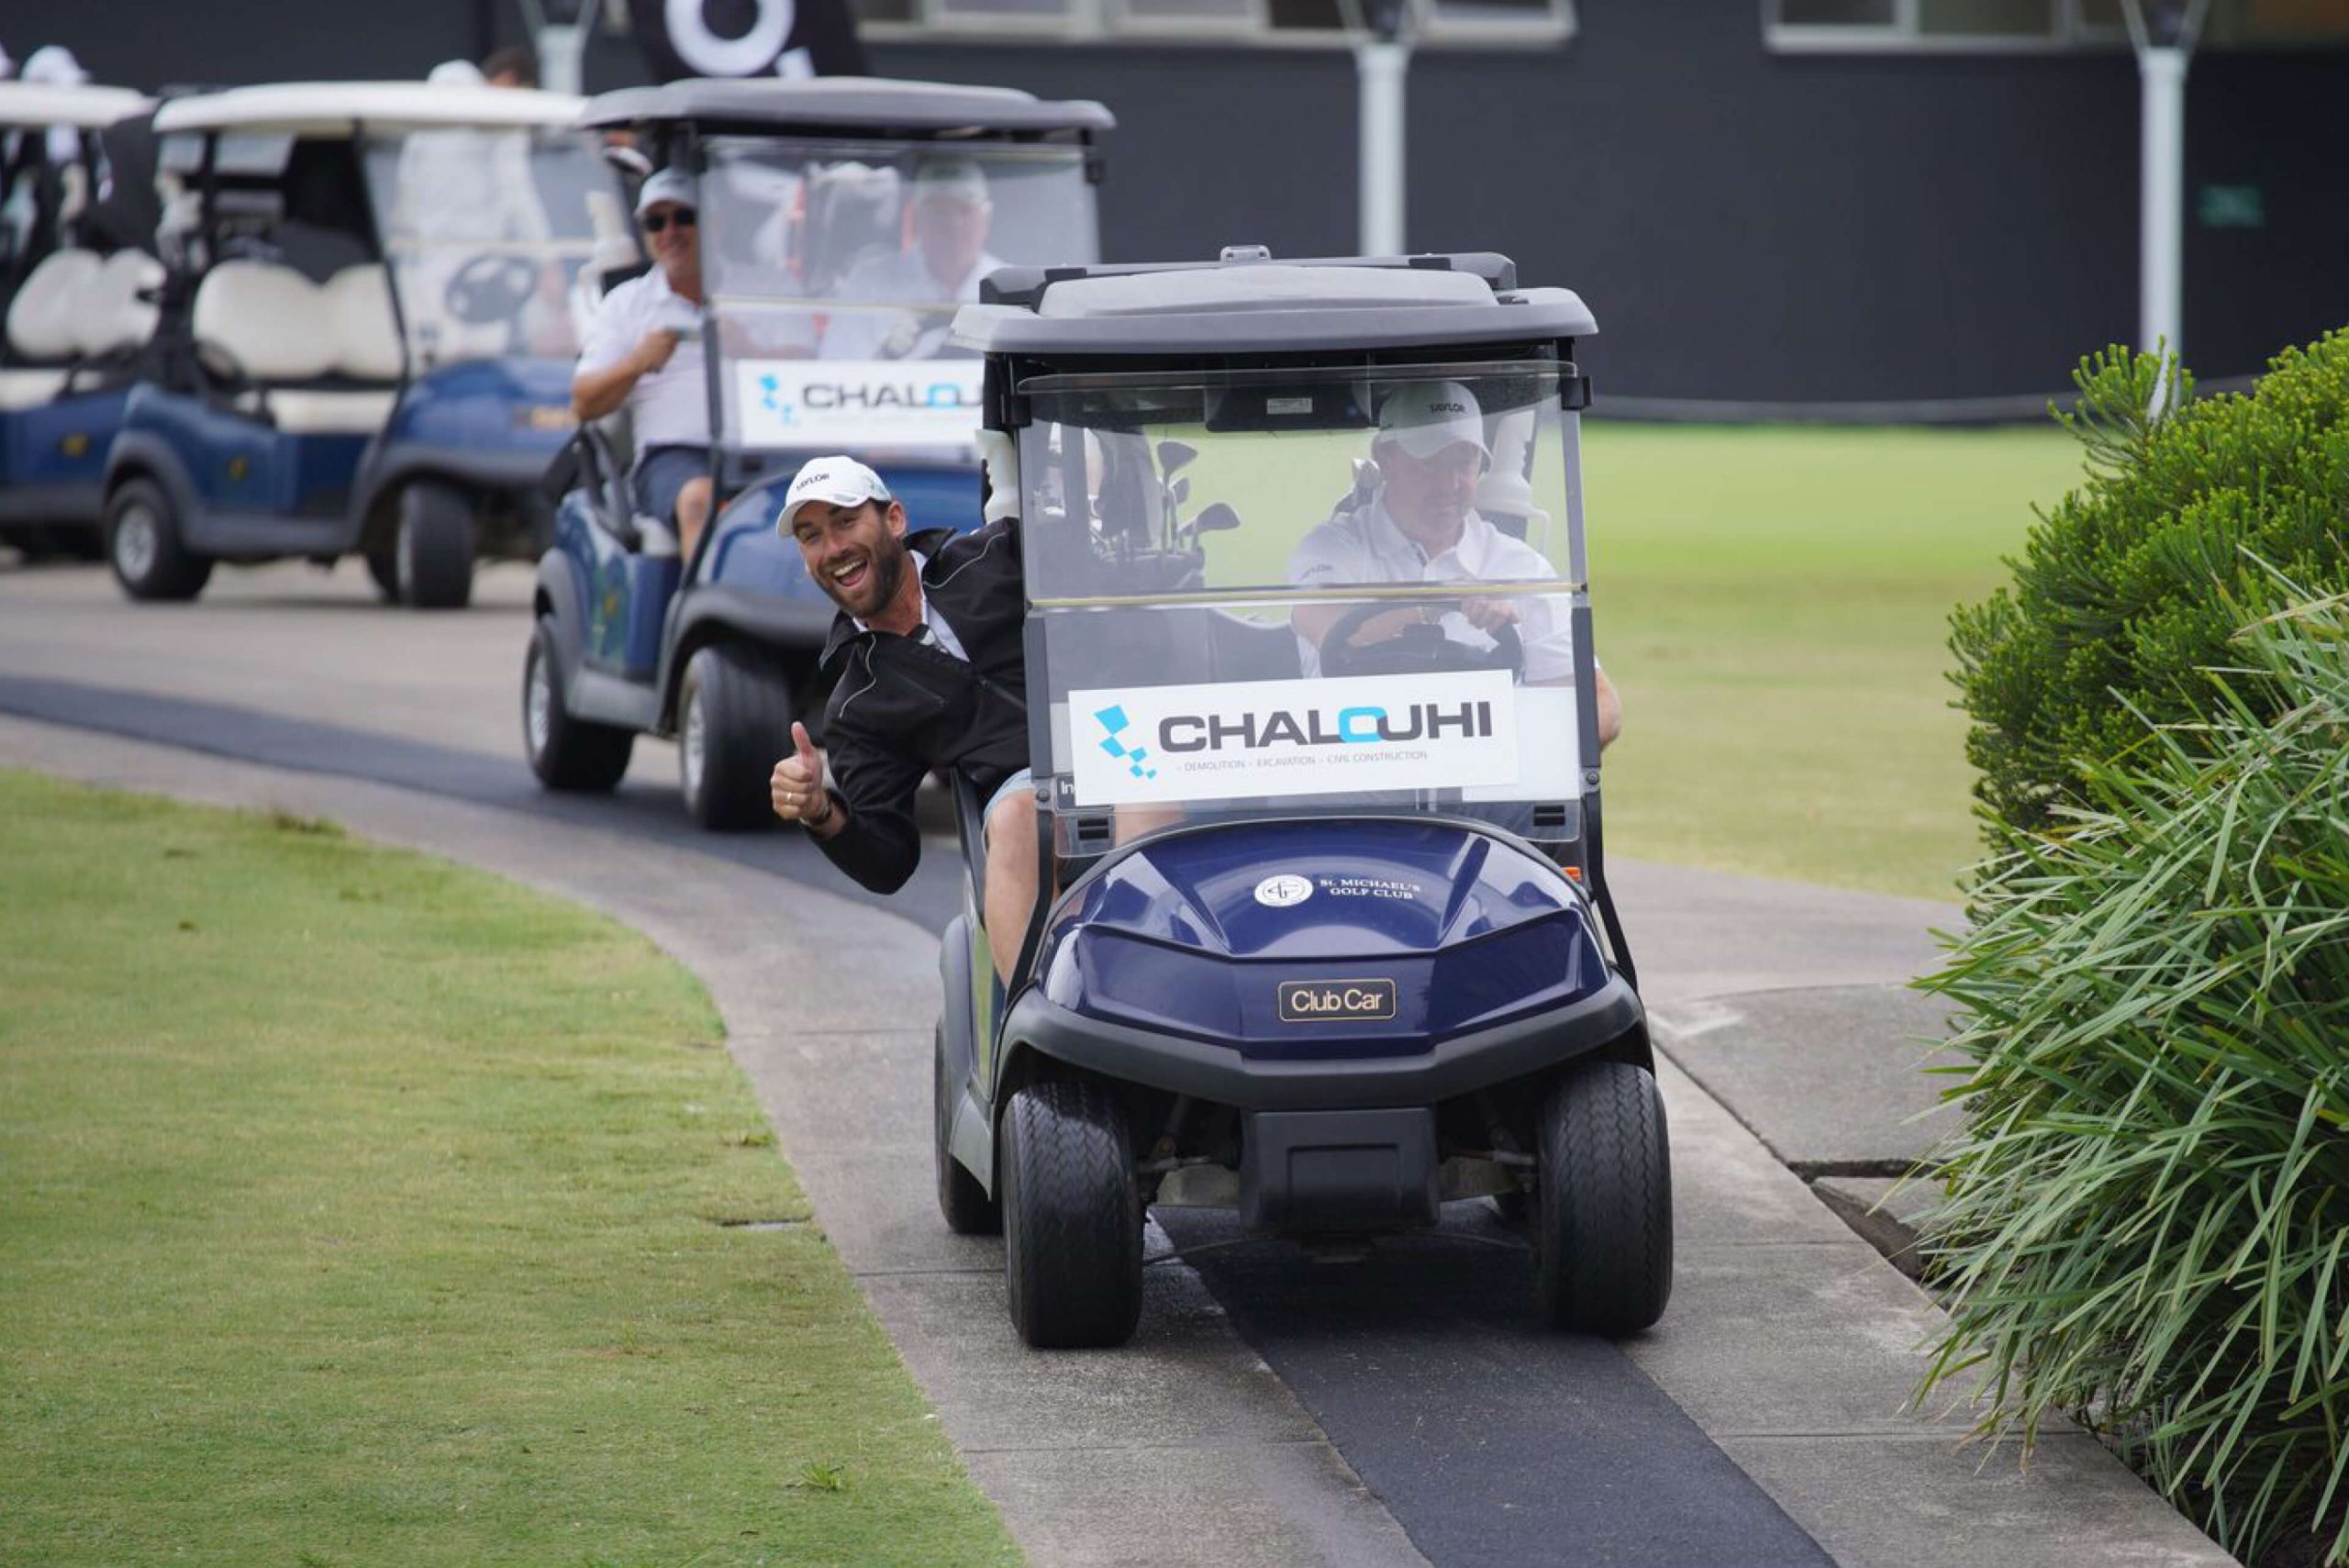 005 players leaving in caddy smiling thumbs up chalouhi taylor charity golf day 2023